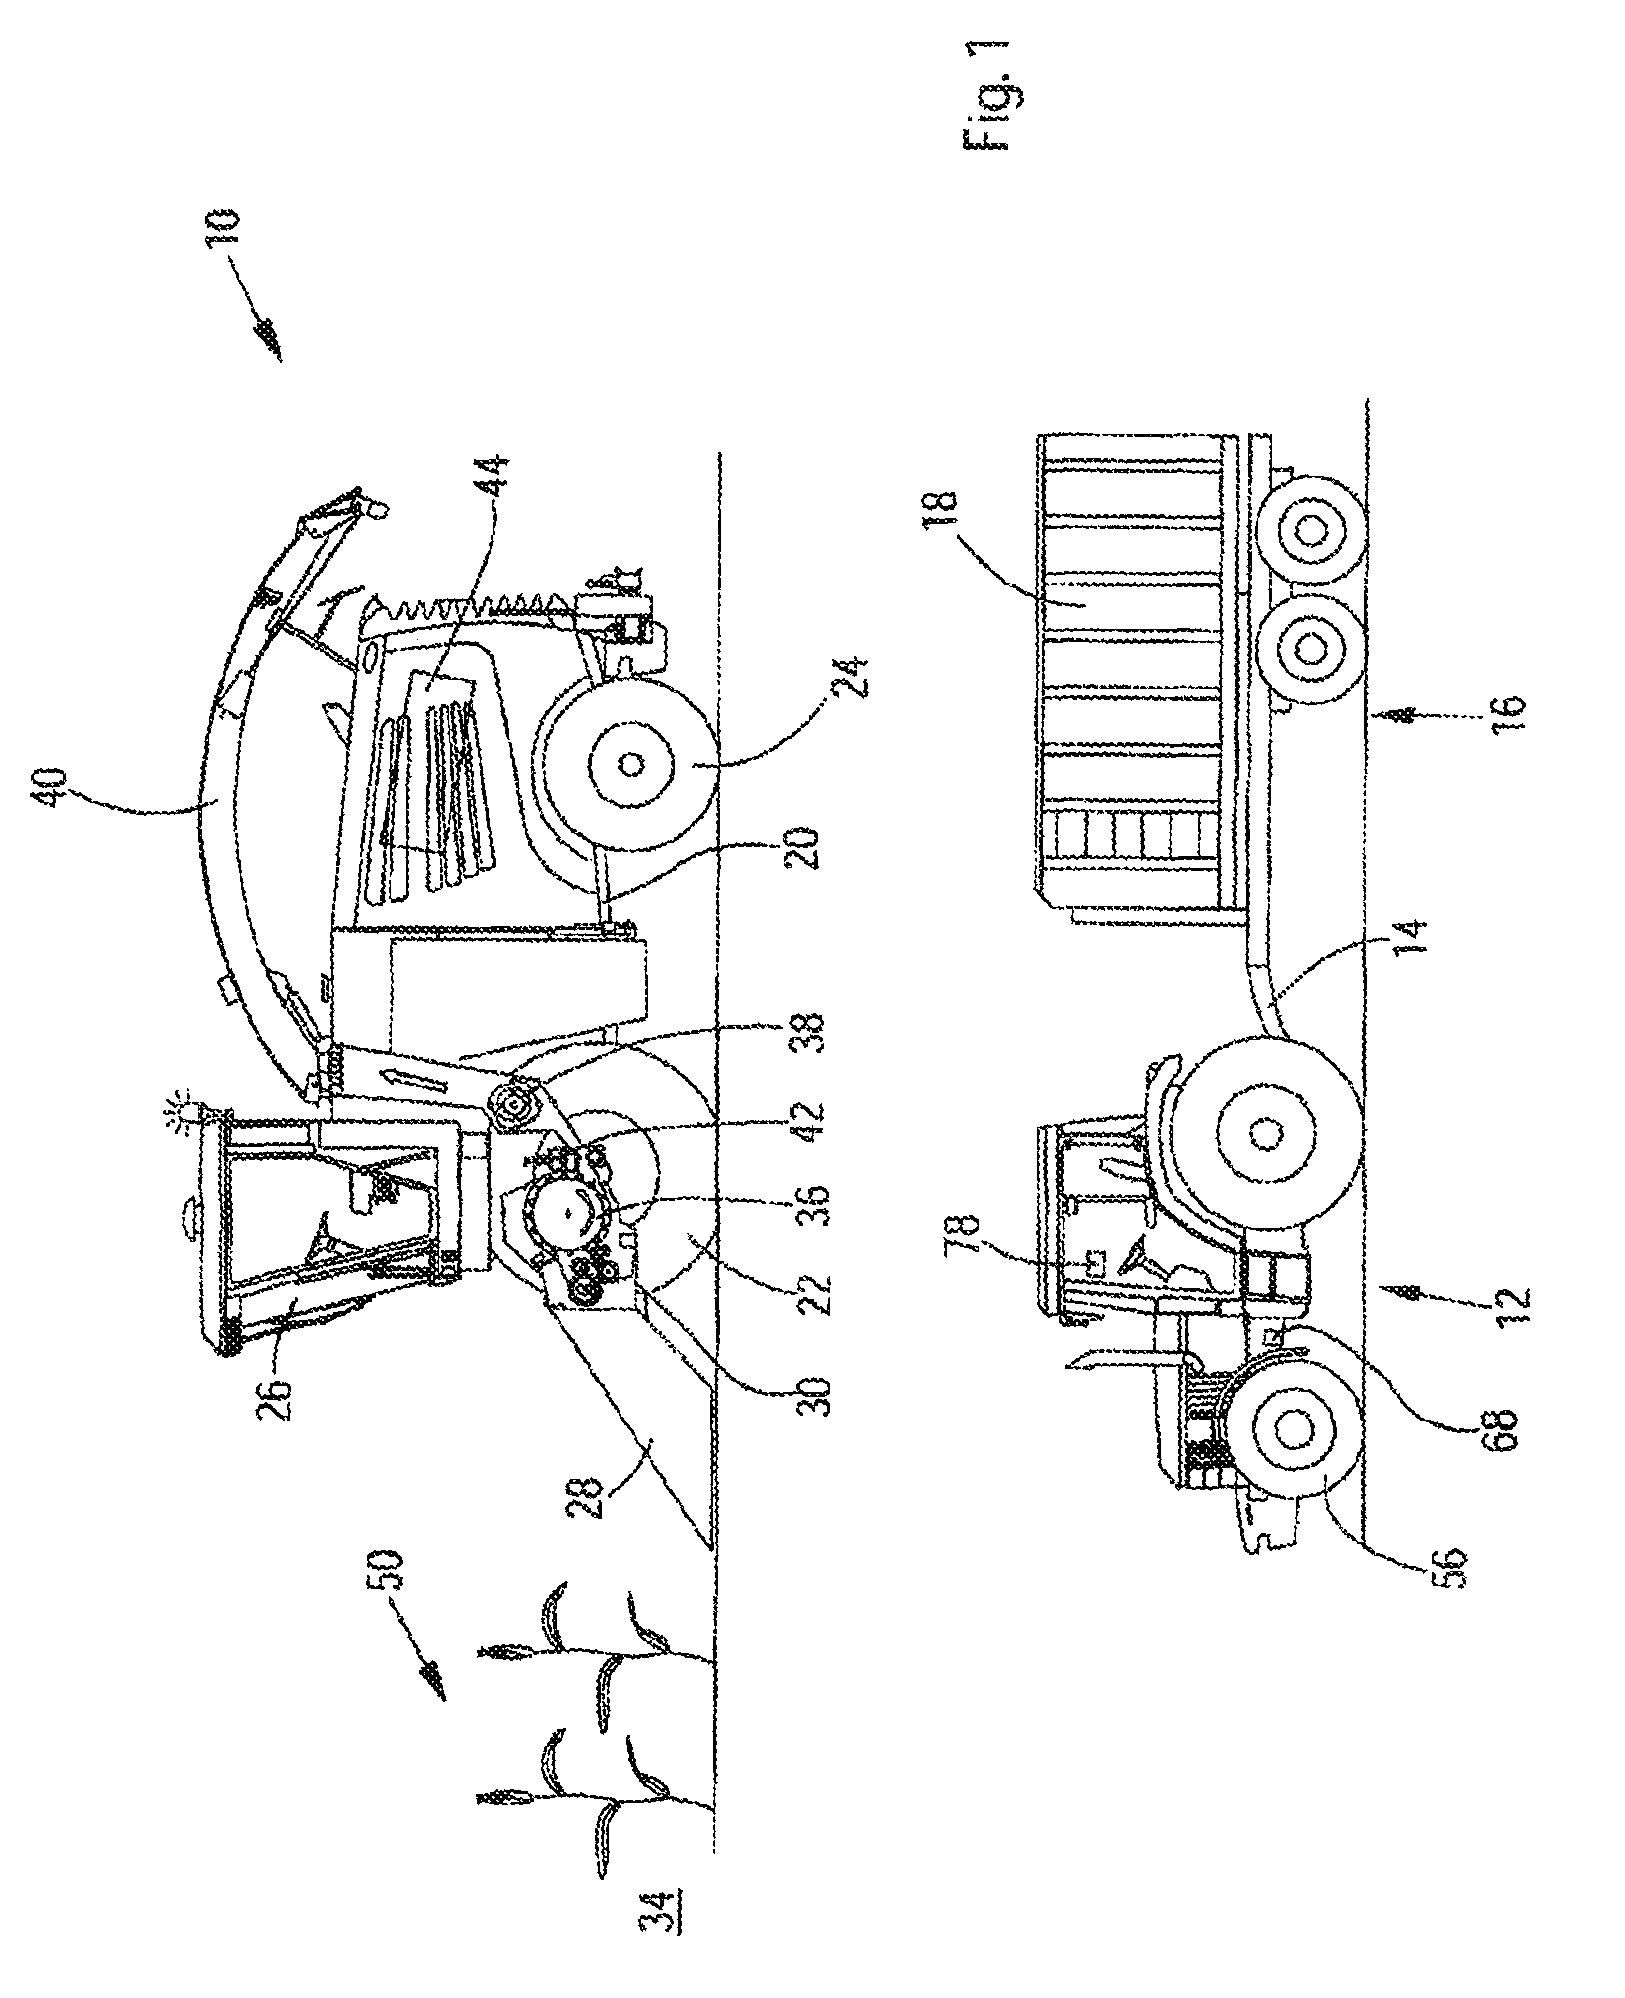 Method and device for steering a second agricultural machine, which can be steered to drive over a field parallel to a first agricultural machine